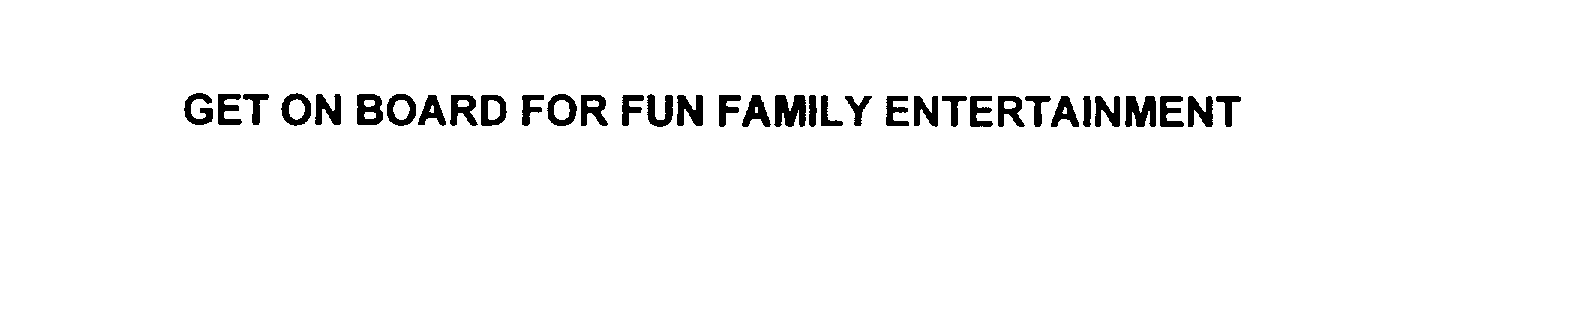  GET ON BOARD FOR FUN FAMILY ENTERTAINMENT